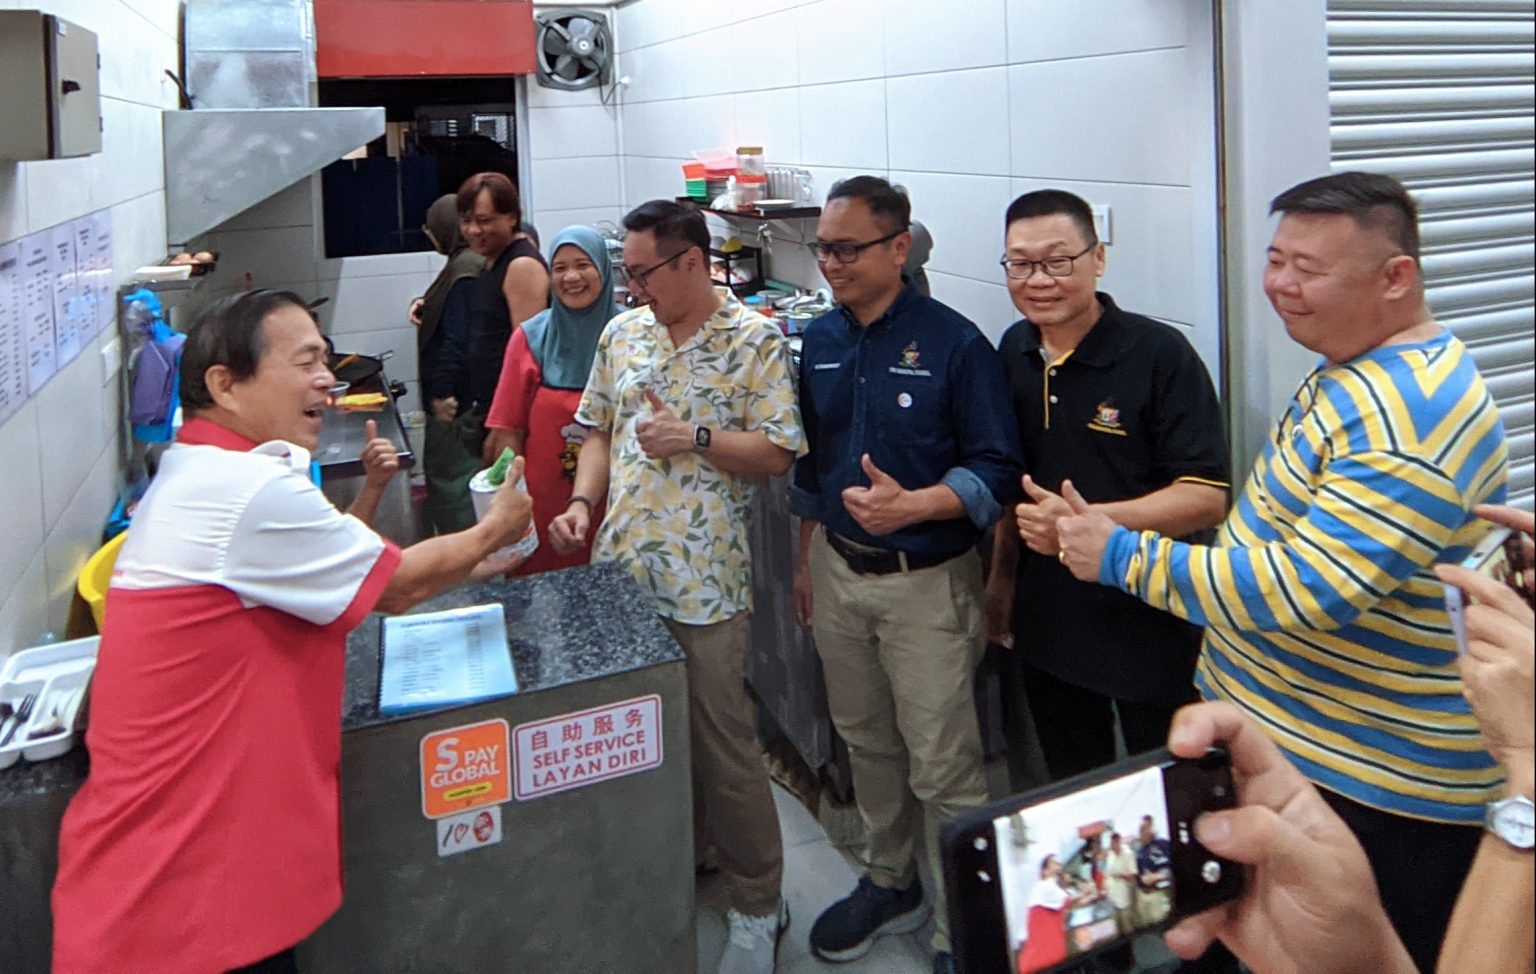 (From front left) Chua, Tiang, and Mohammed Abdullah are seen at a stall. – Photo by Peter Boon